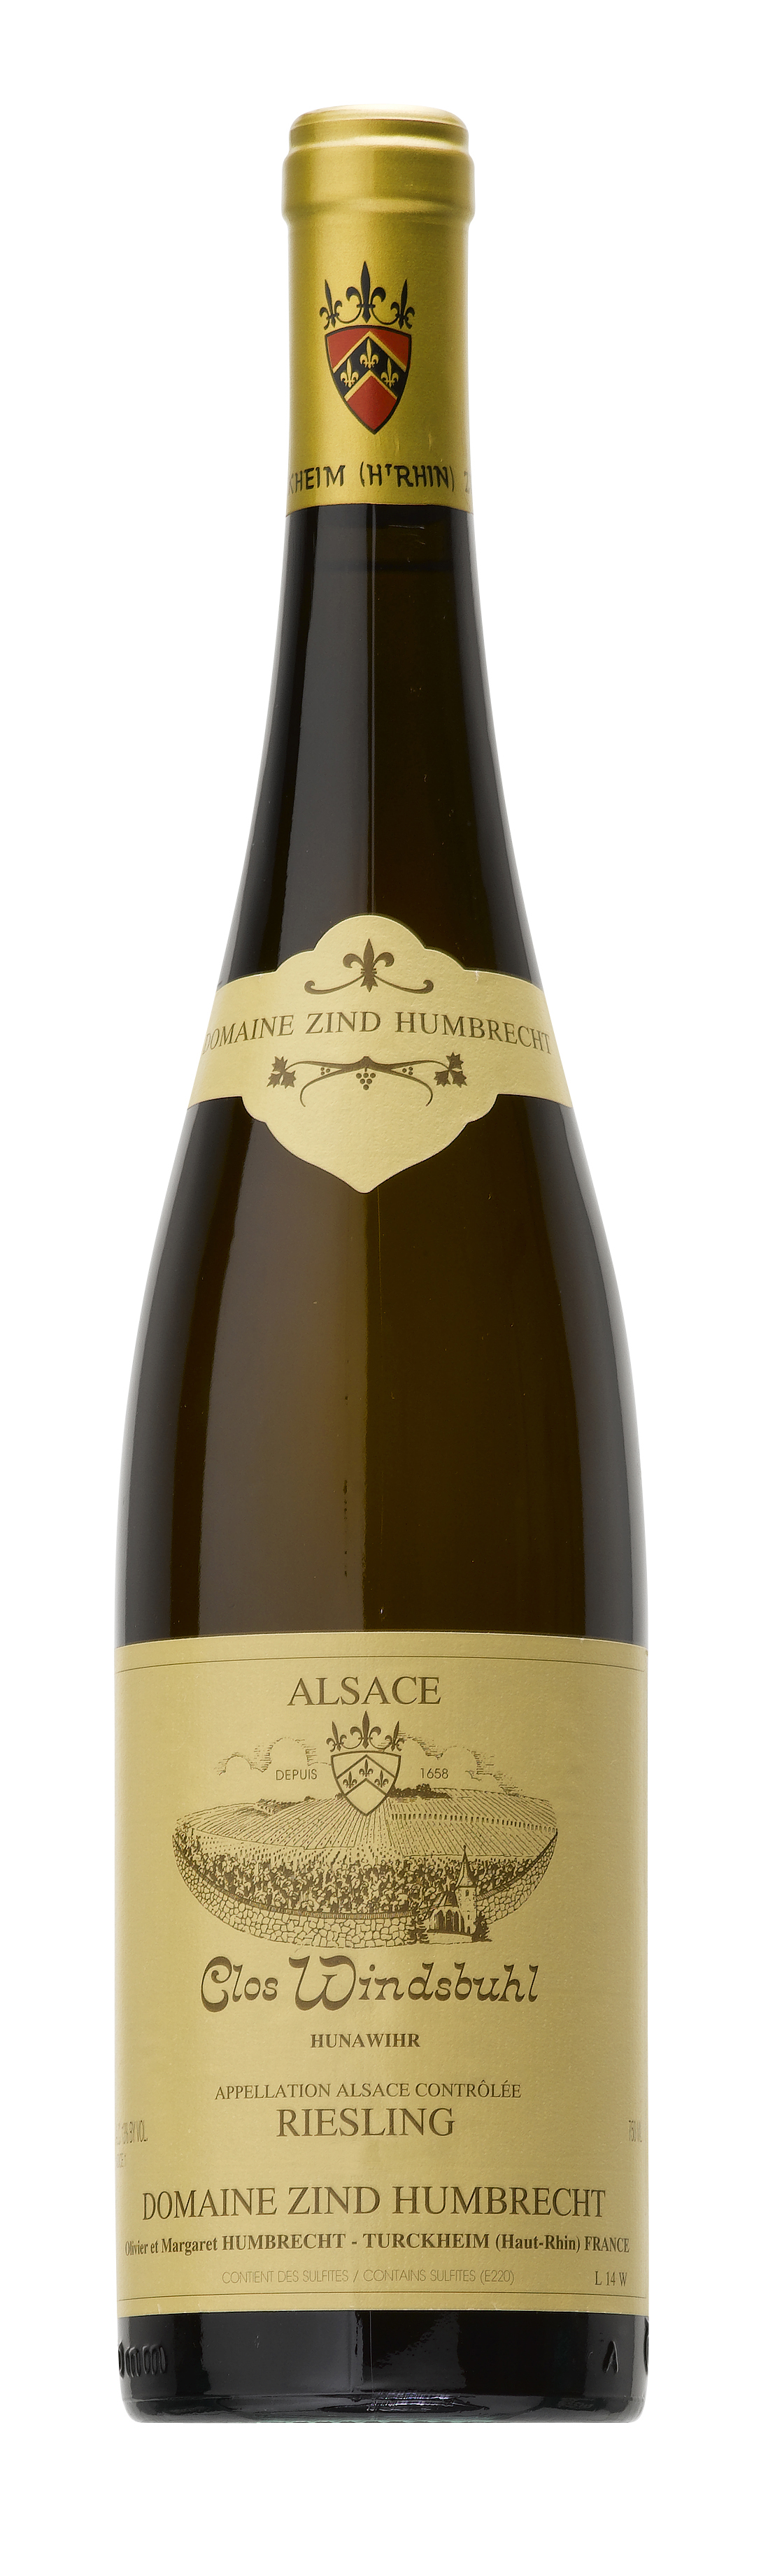 Riesling clos windsbull  domaine zind humbrecht 2011  Alsace, Slection Alsace